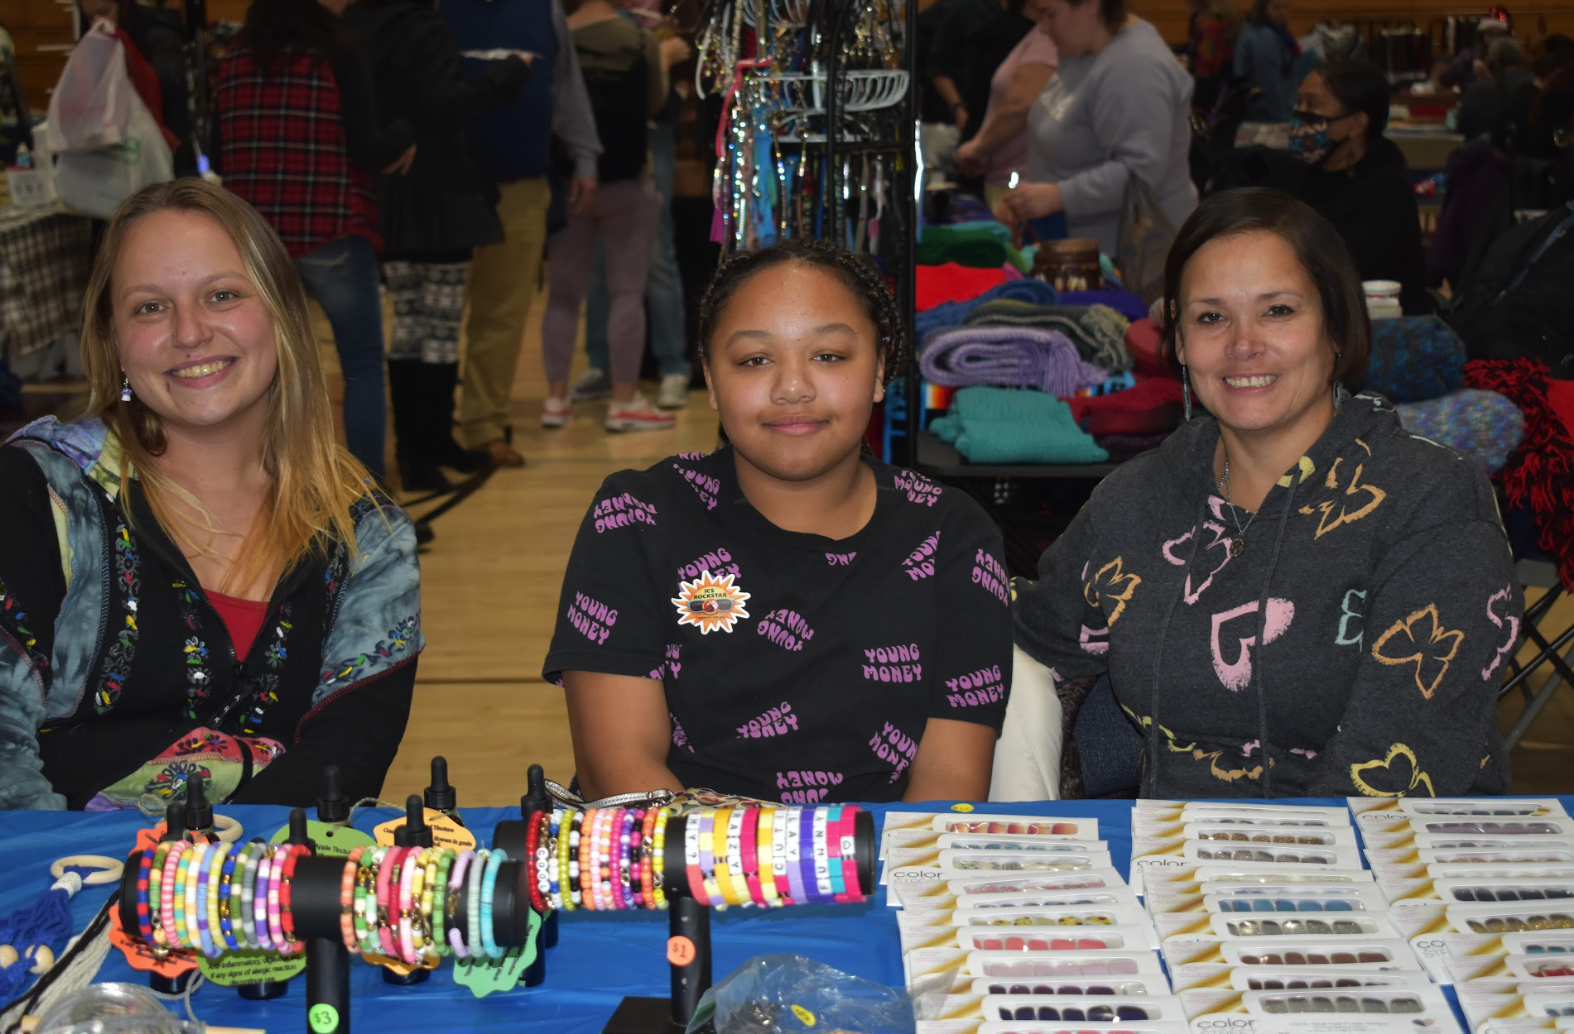 Two ICS teachers and a student sitting at their table selling jewelry.